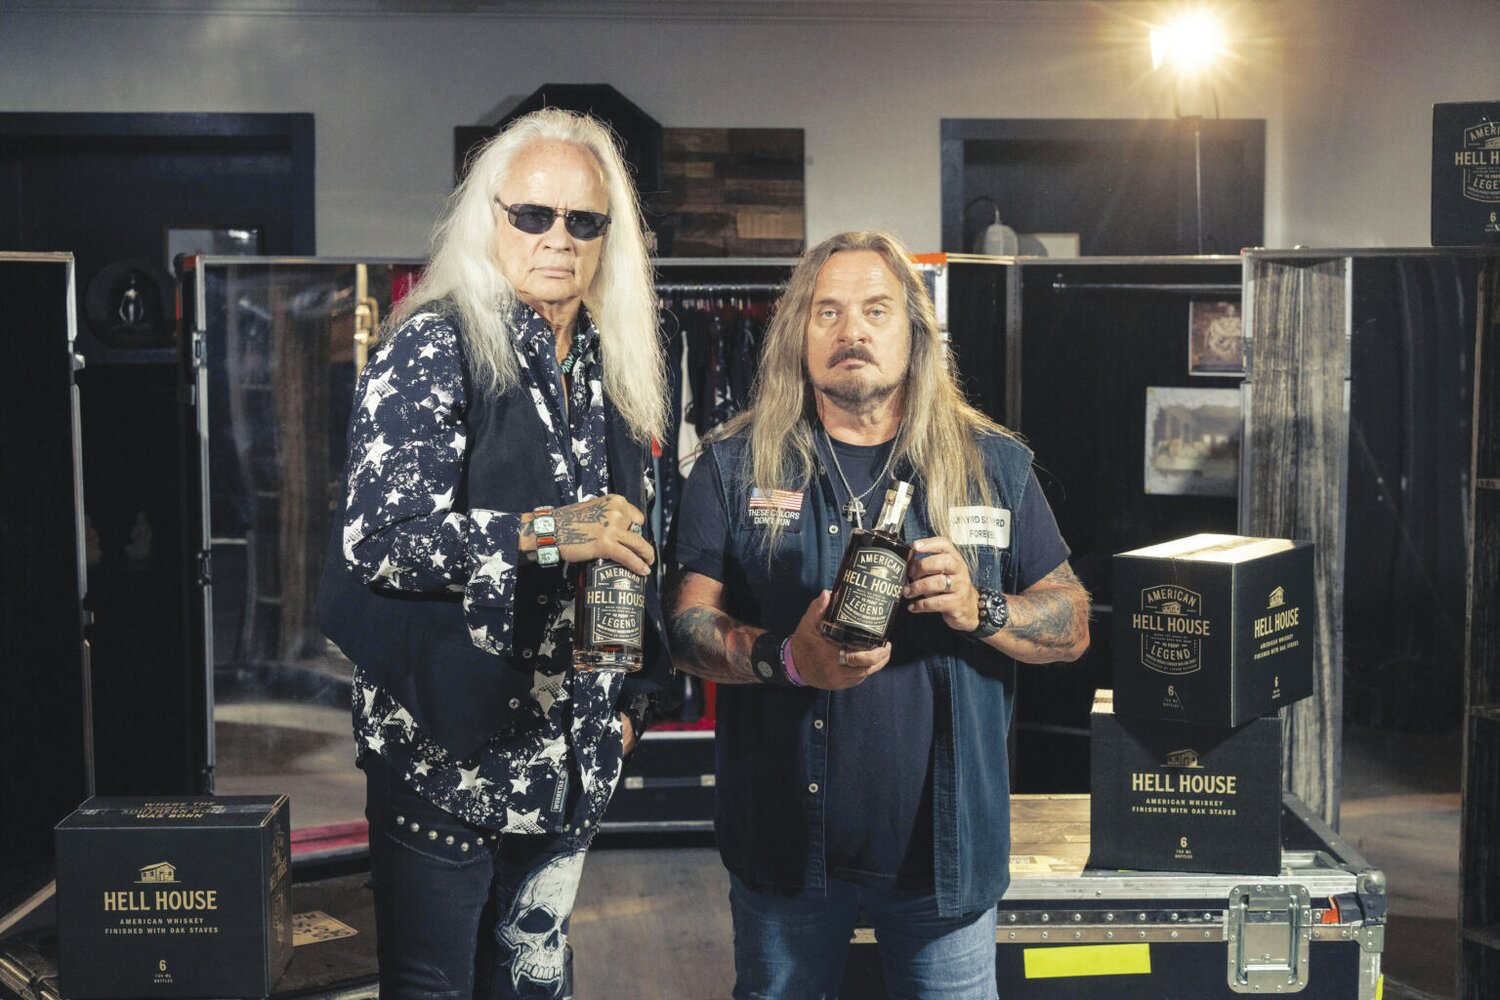 Lynyrd Skynyrd guitarists Rickey Medlocke (l) and frontman Johnny Van Zant will be at Whitey’s Fish Camp on Wednesday, Oct. 4, to introduce their new Hell House Whiskey. They will be autographing bottles of the hooch named after the famous Green Cove Springs shack, where many of the band’s iconic songs were written 50 years ago. The event is from 6 p.m. to 9 p.m. Due to the expected large turnout, they won’t be able to sign any other merchandise.